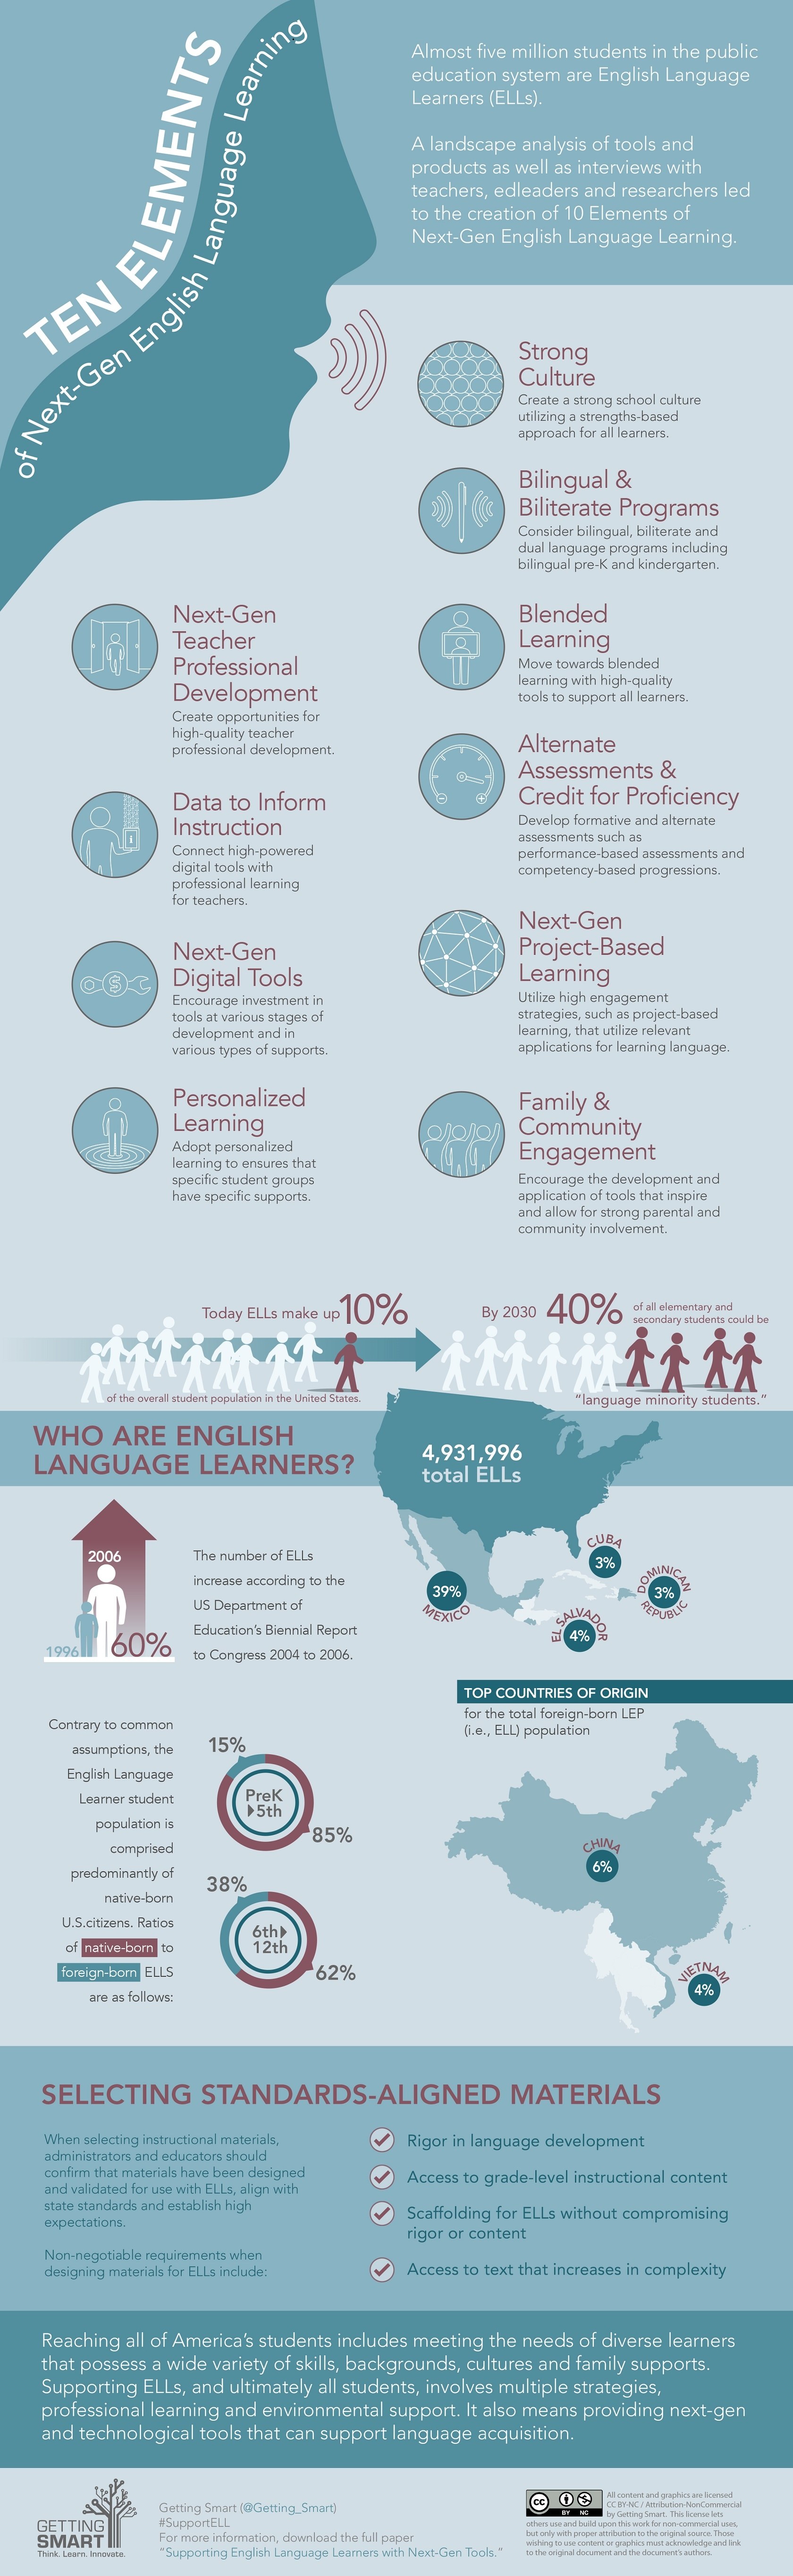 10 Elements of Next-Gen English Language Learning Infographic